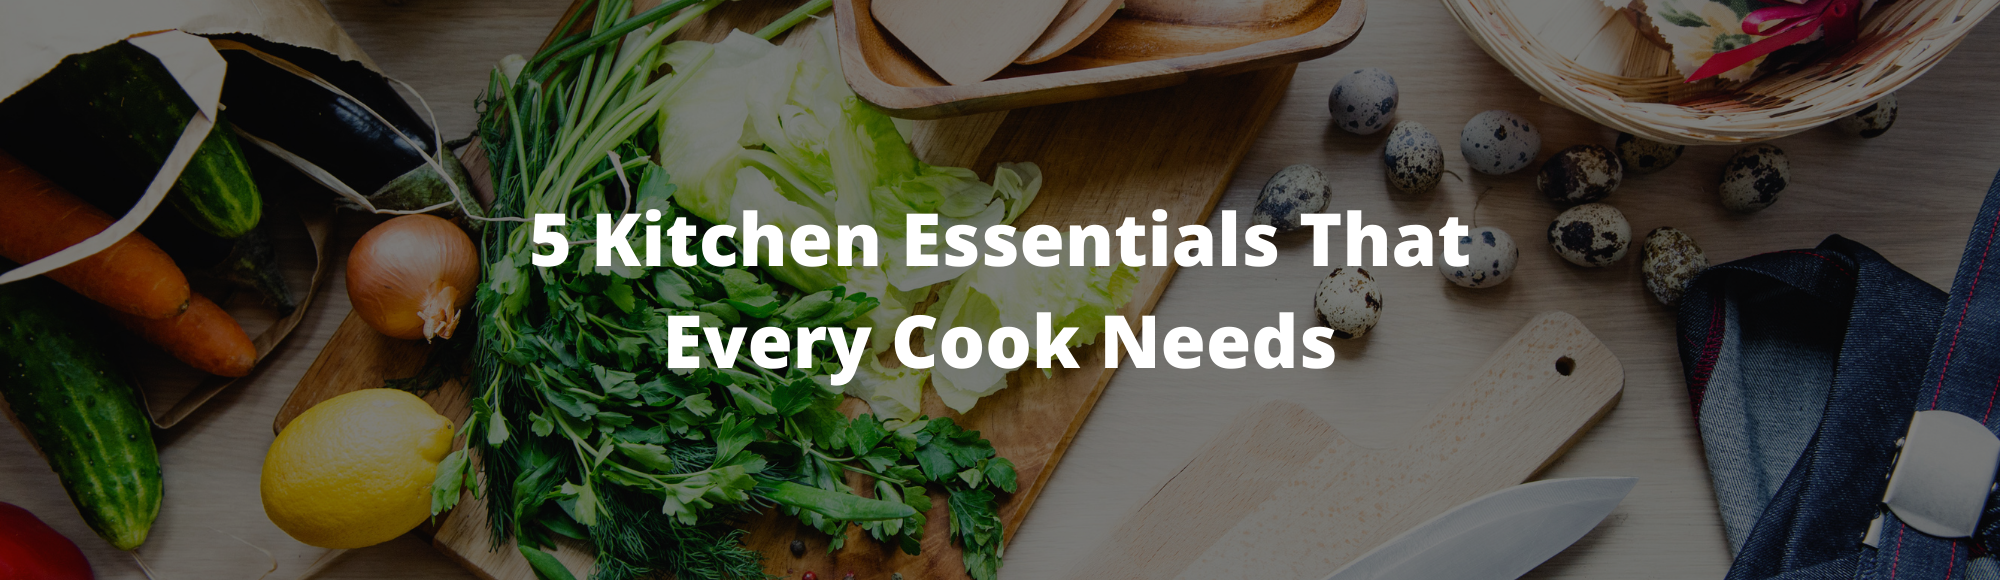 5 Kitchen Essentials That Every Cook Needs - Forked Again